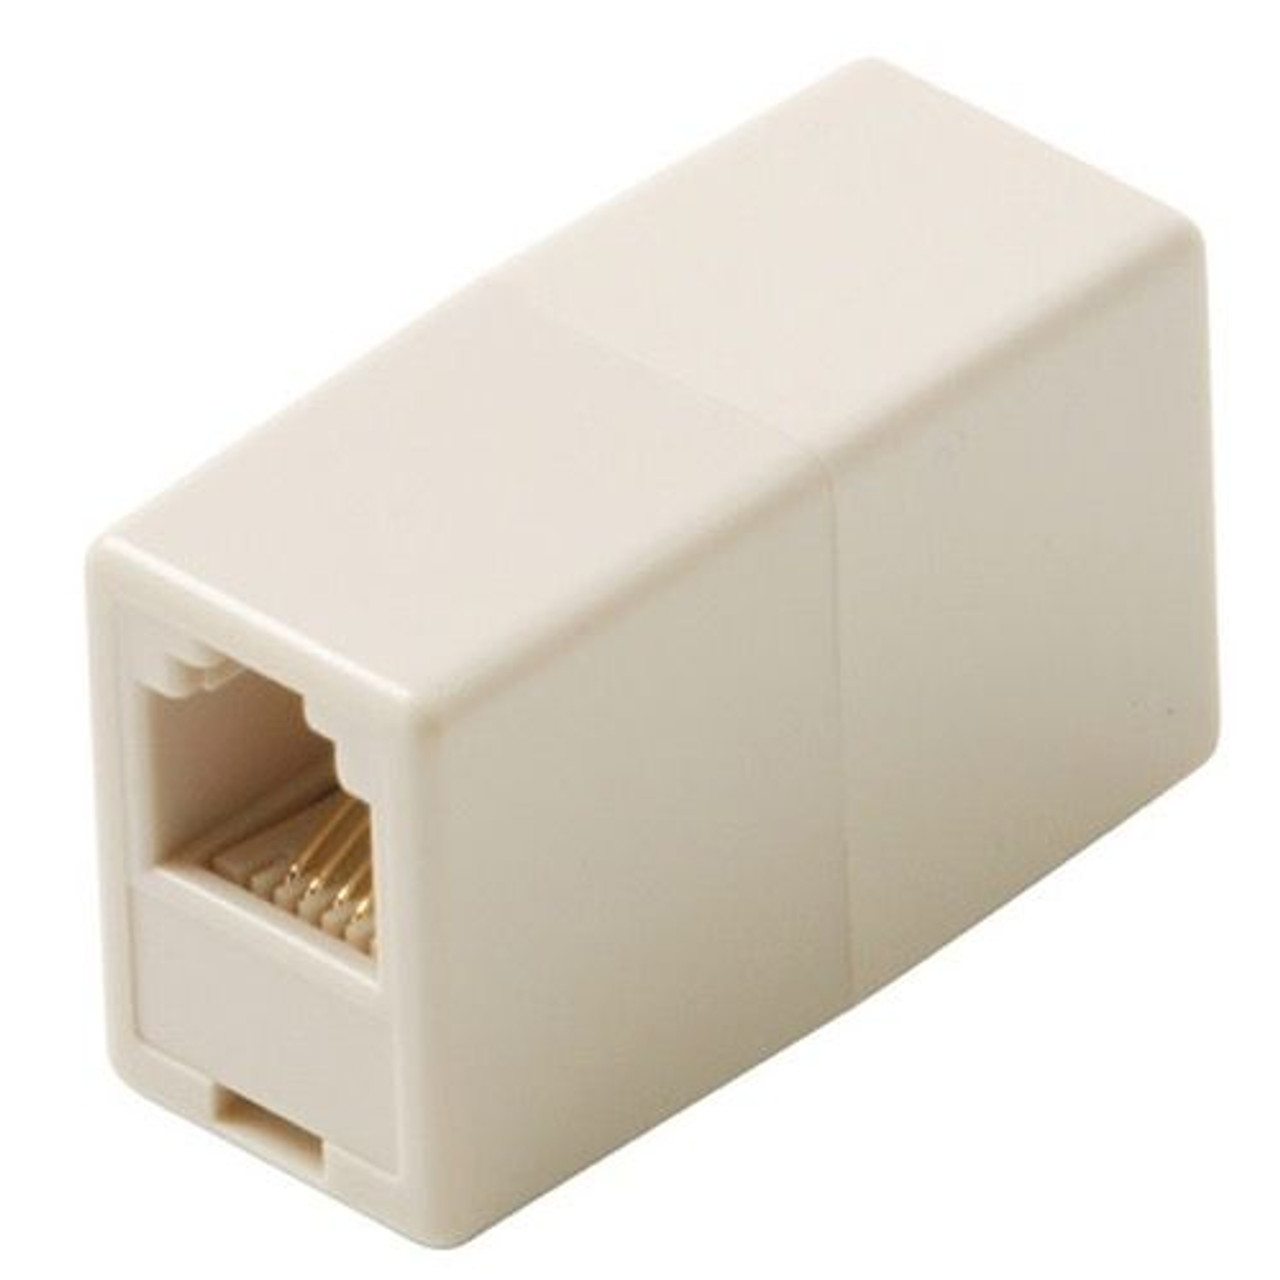 Steren 300-036IV Telephone Coupler In Line 6 Conductor Ivory Voice Adapter Modular 6P6C RJ12 Gold Inline Phone In-Line RJ-12 Cable Female Jack Cord Add-On Snap Plug Adapter